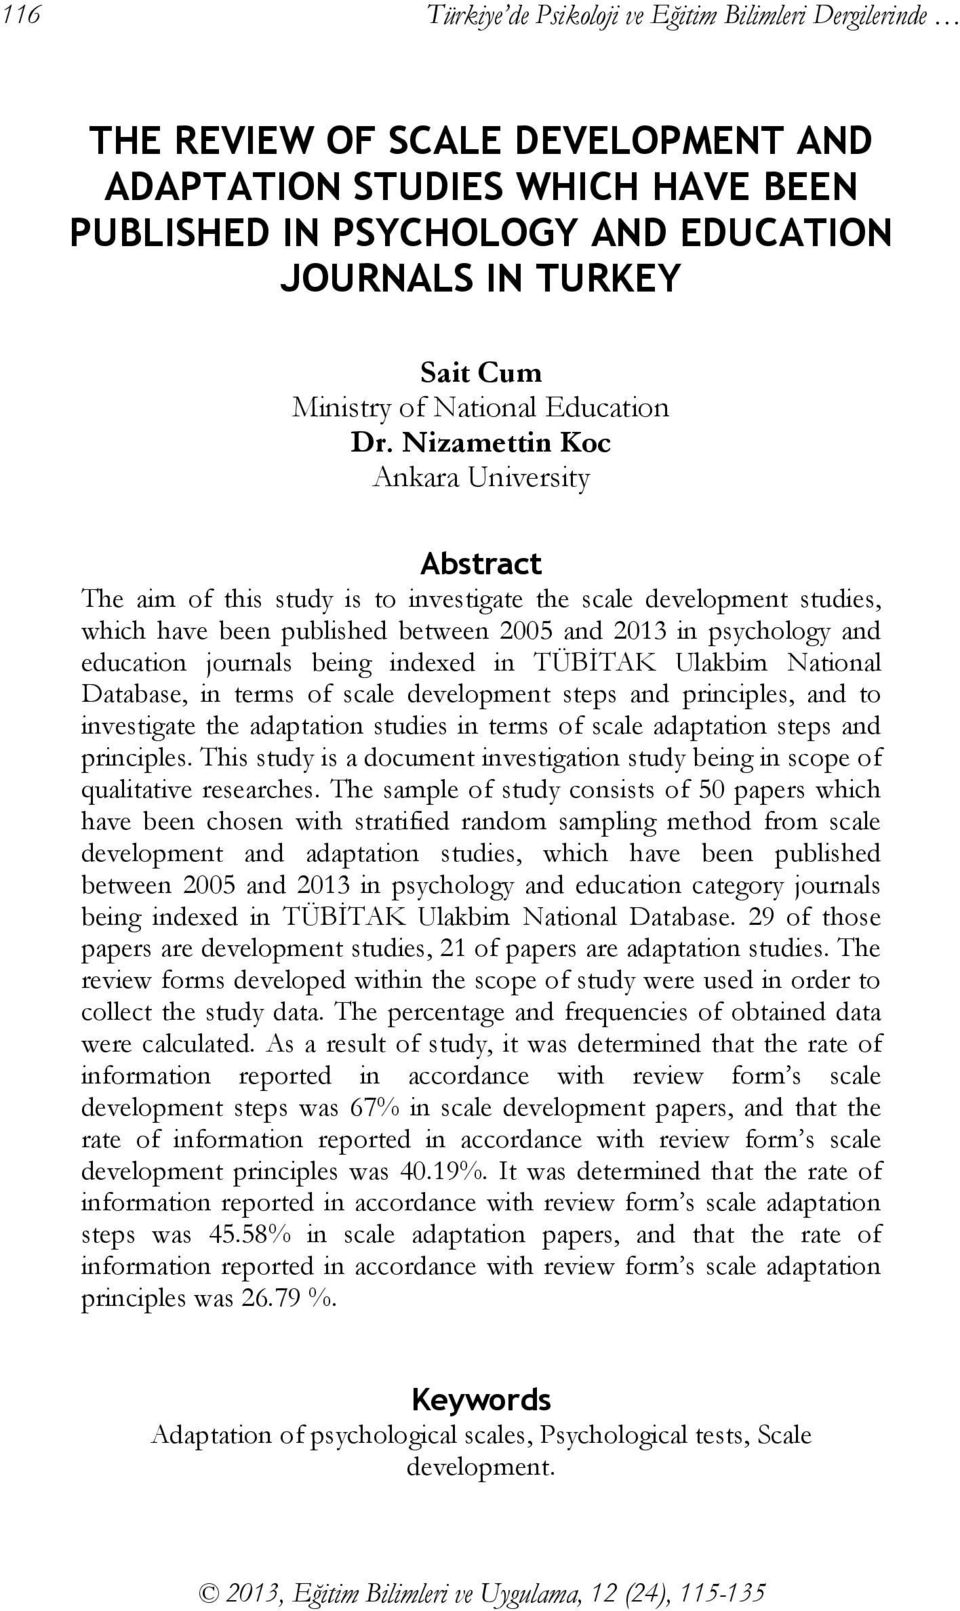 Nizamettin Koc Ankara University Abstract The aim of this study is to investigate the scale development studies, which have been published between 2005 and 2013 in psychology and education journals